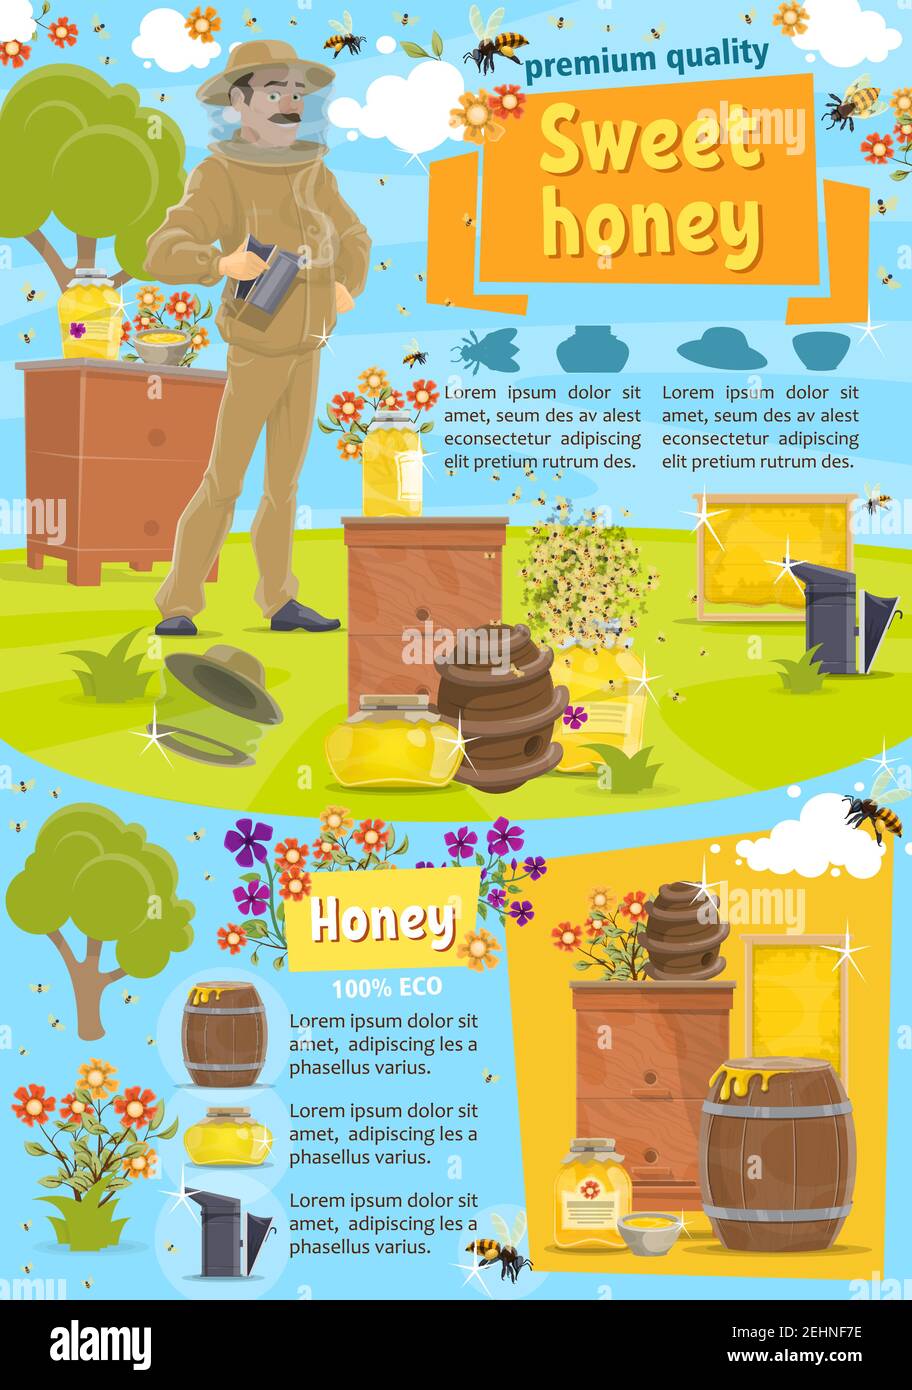 Beekeeping, apiary and beekeeper. Man in protective suit and jars or barrels of honey, bees swarm flying around flowers, beehives. Apiculture farm pro Stock Vector